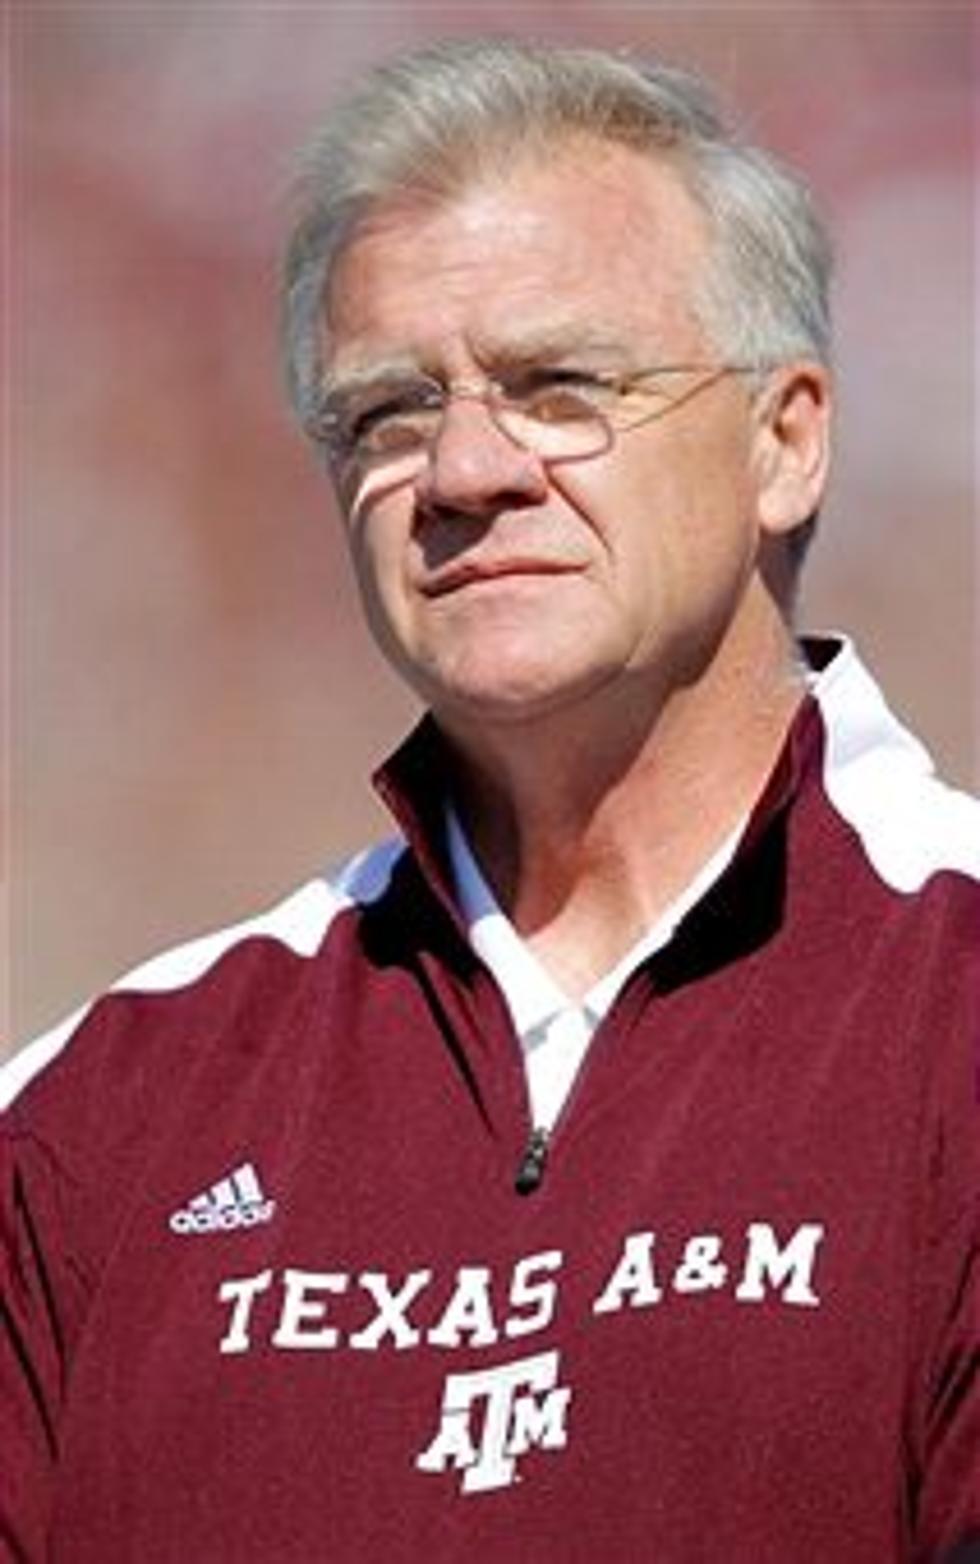 Sherman Fired at Texas A&M